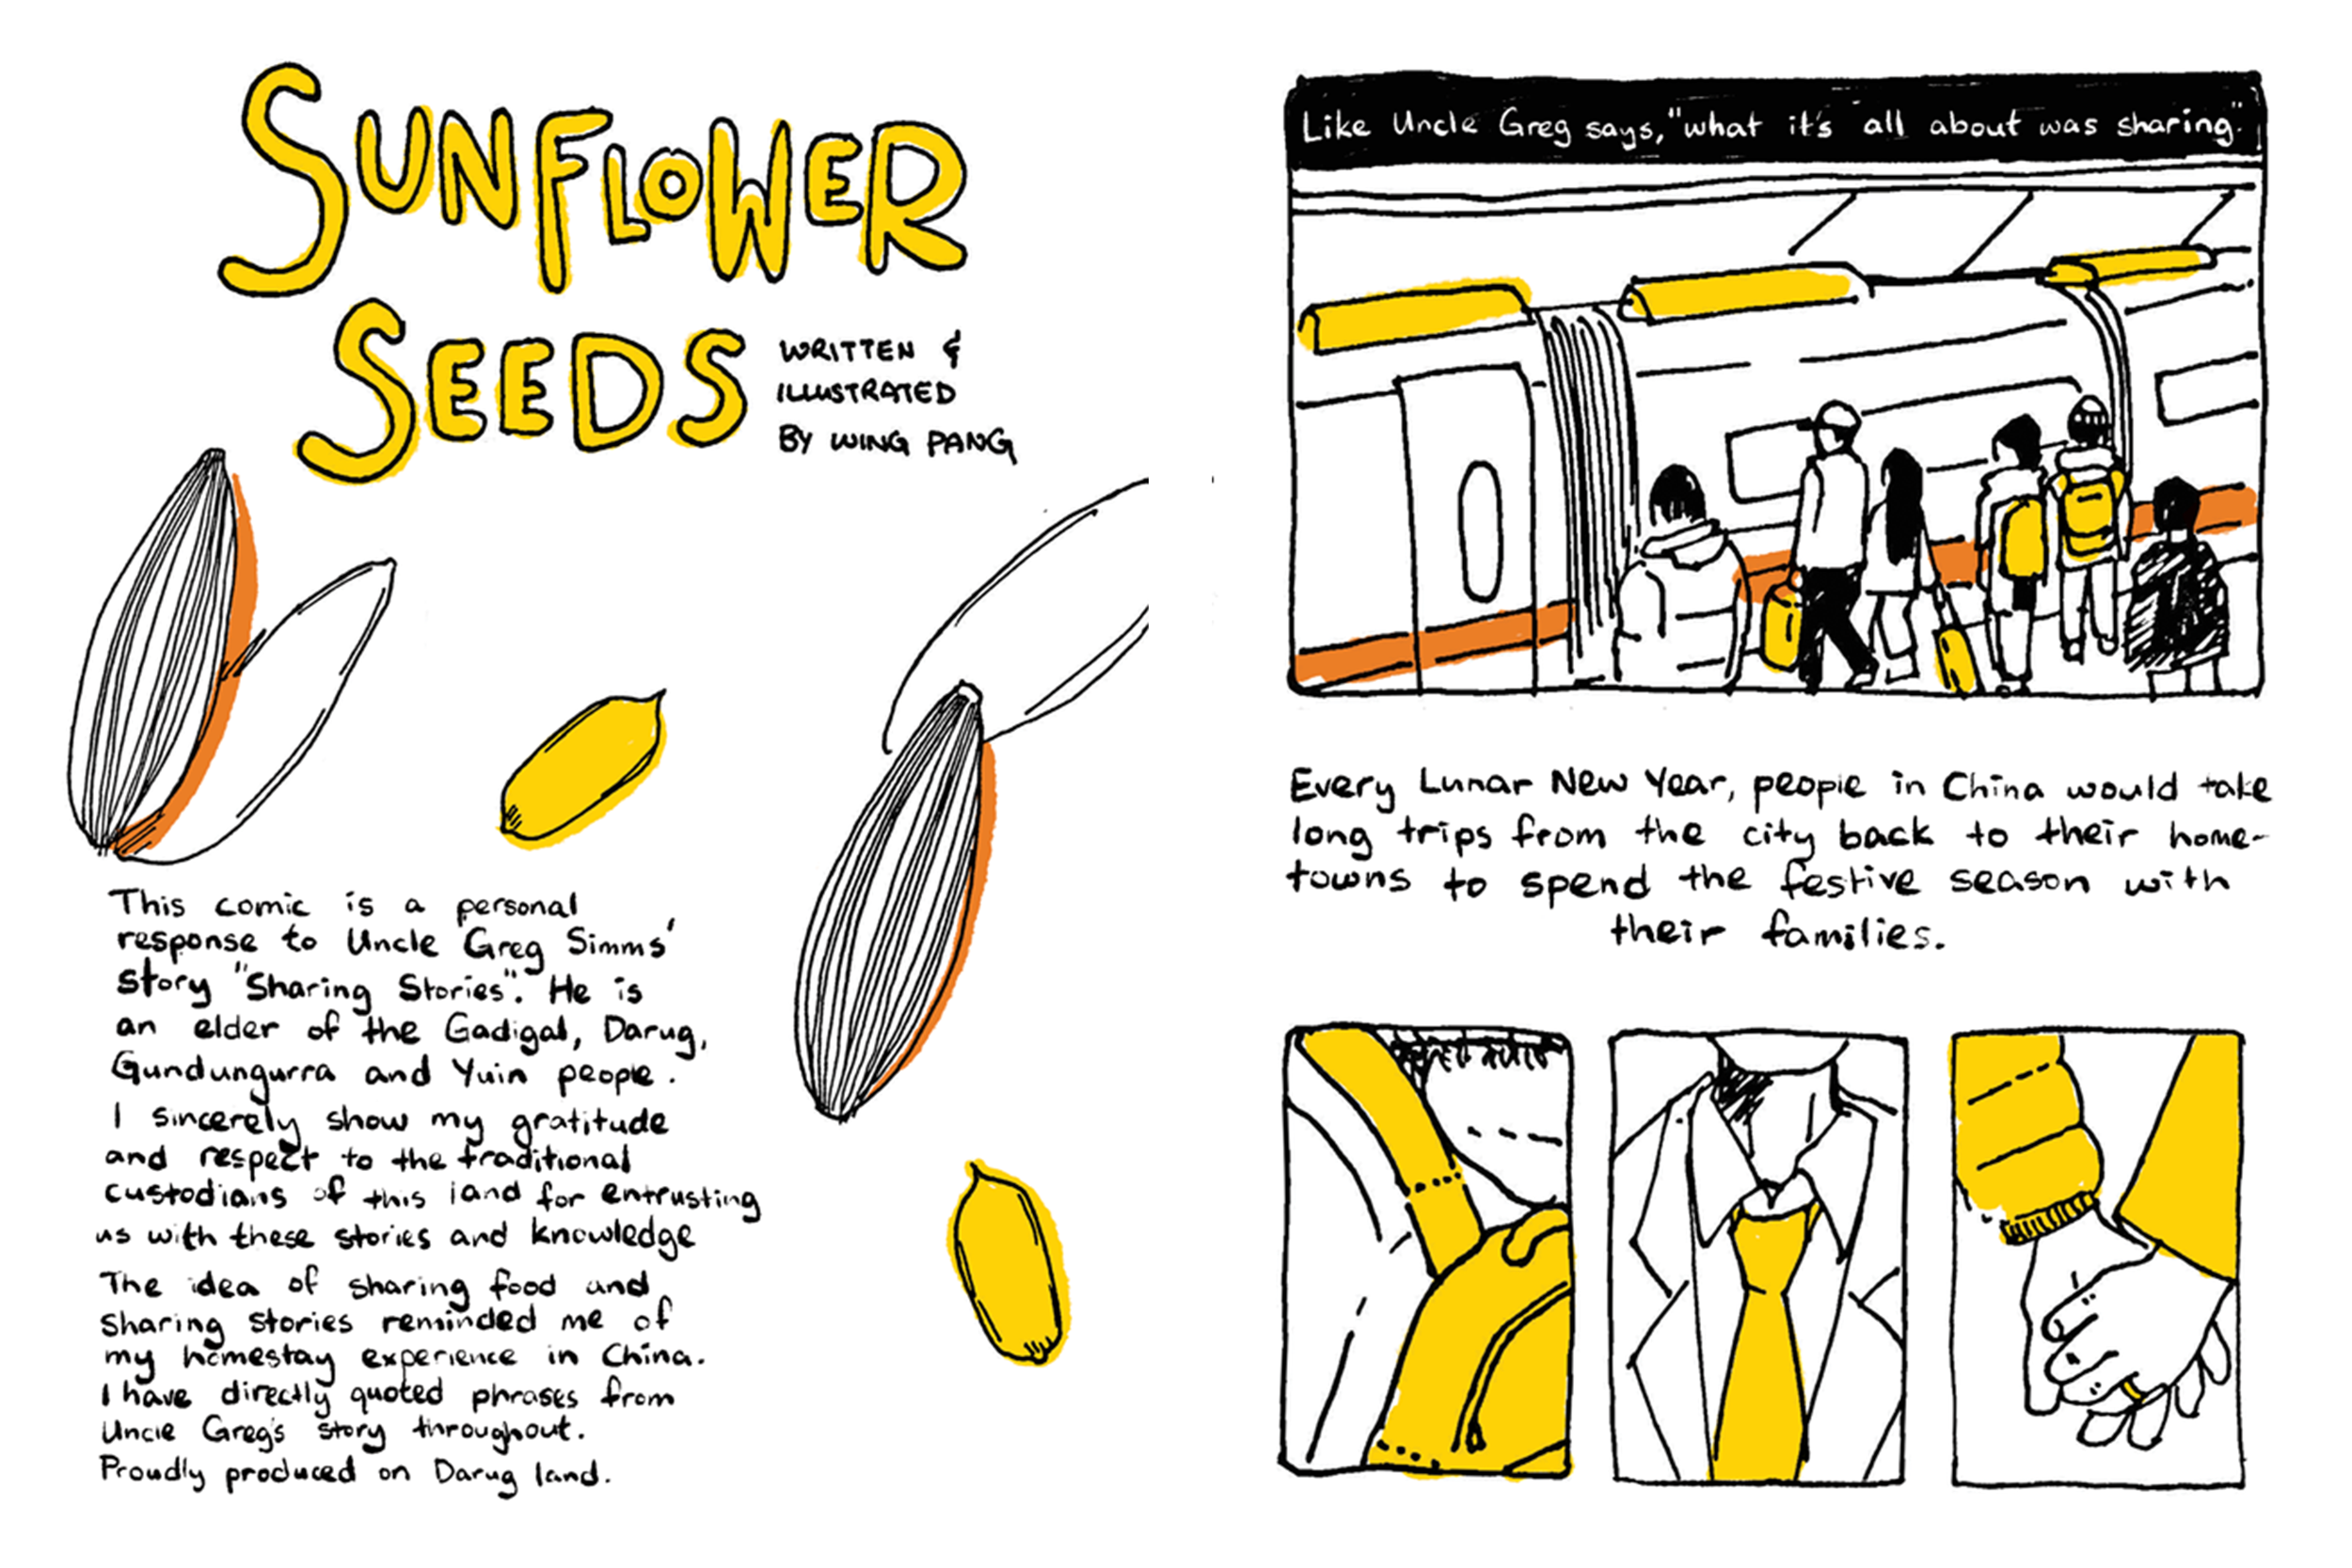 Page one of Sunflower Seeds.